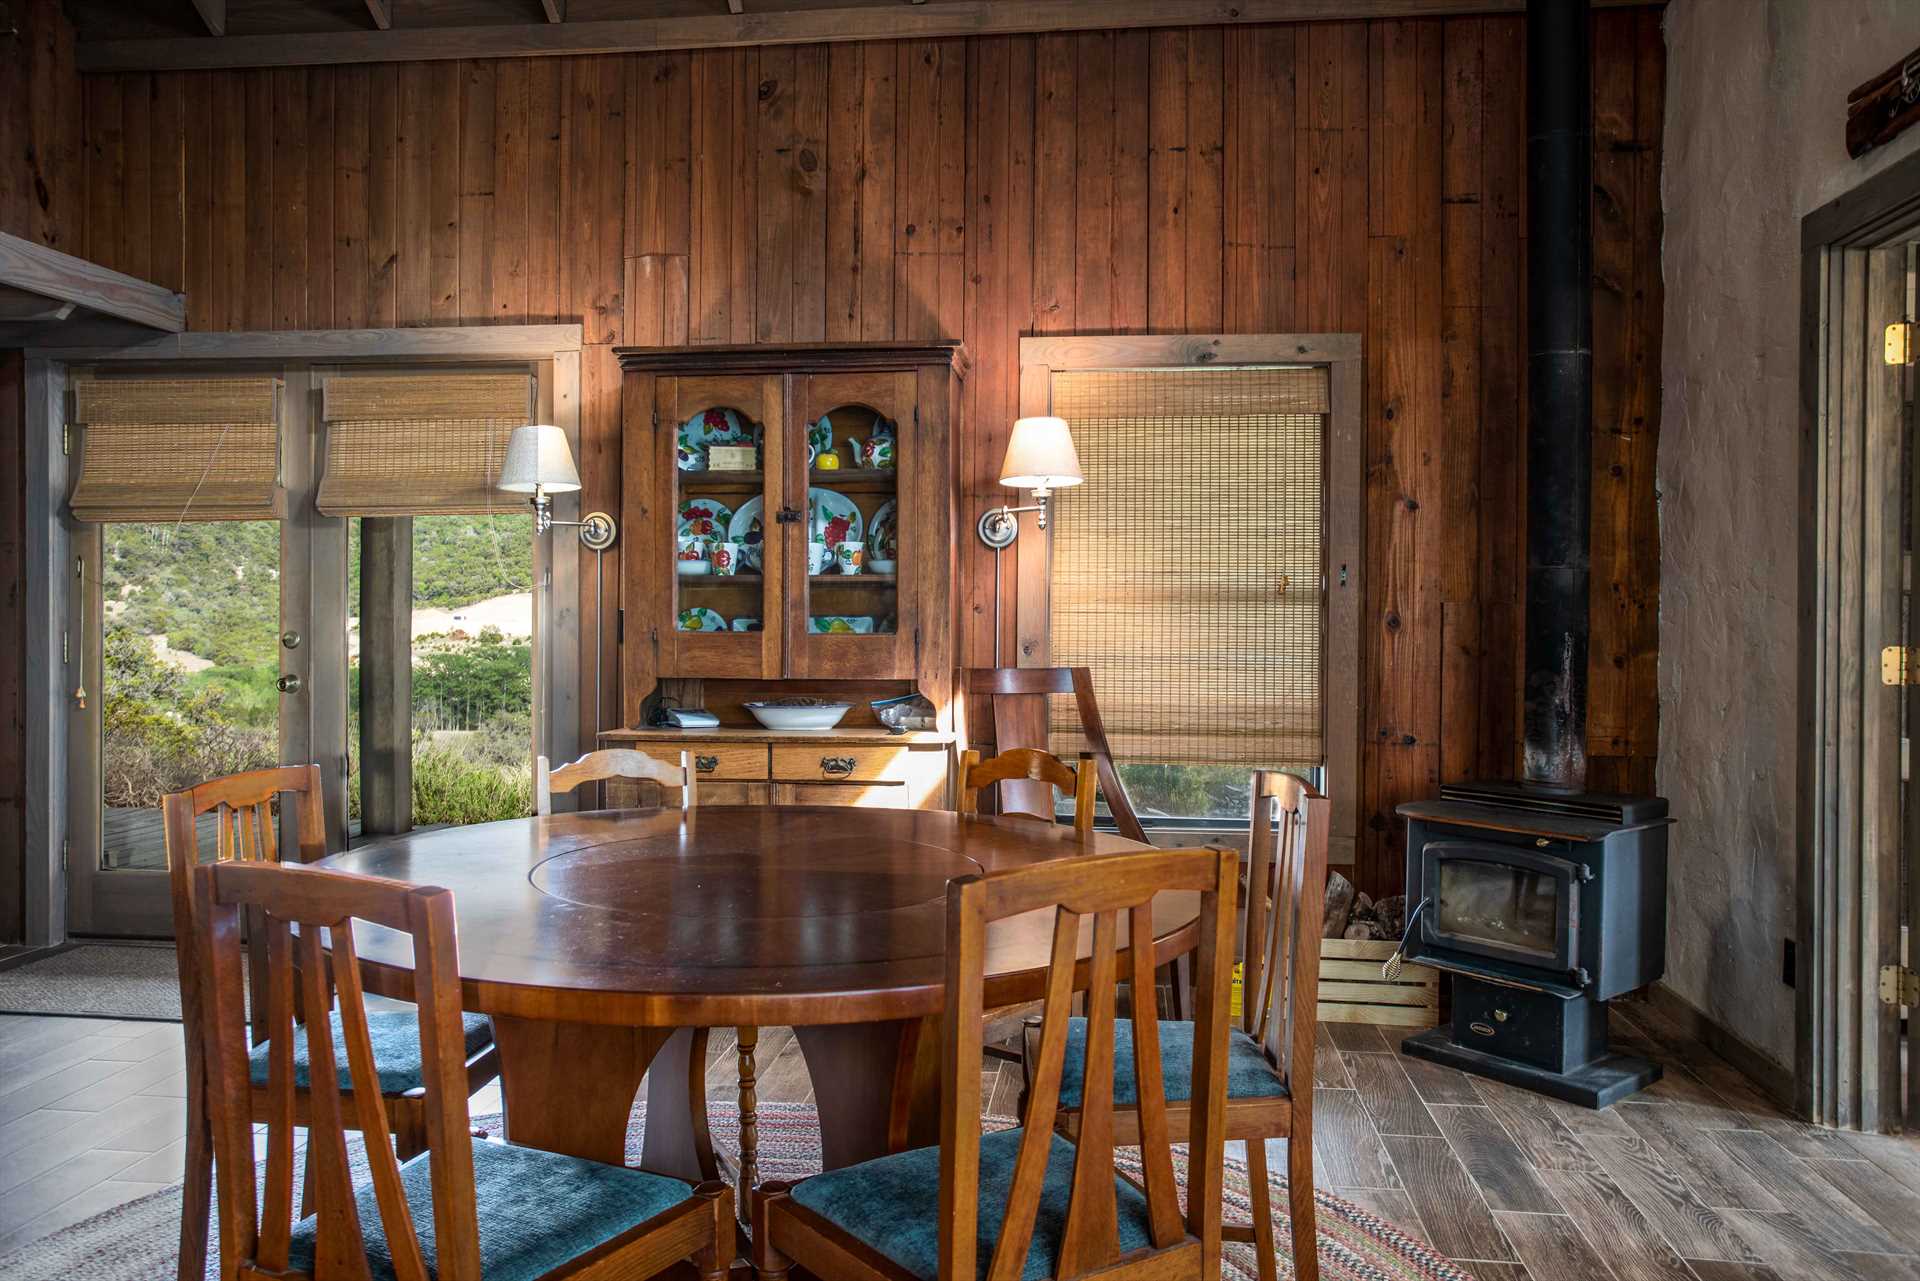                                                 The wood-burning stove in the dining room works perfectly, and helps cut the chilliness of frosty nights.